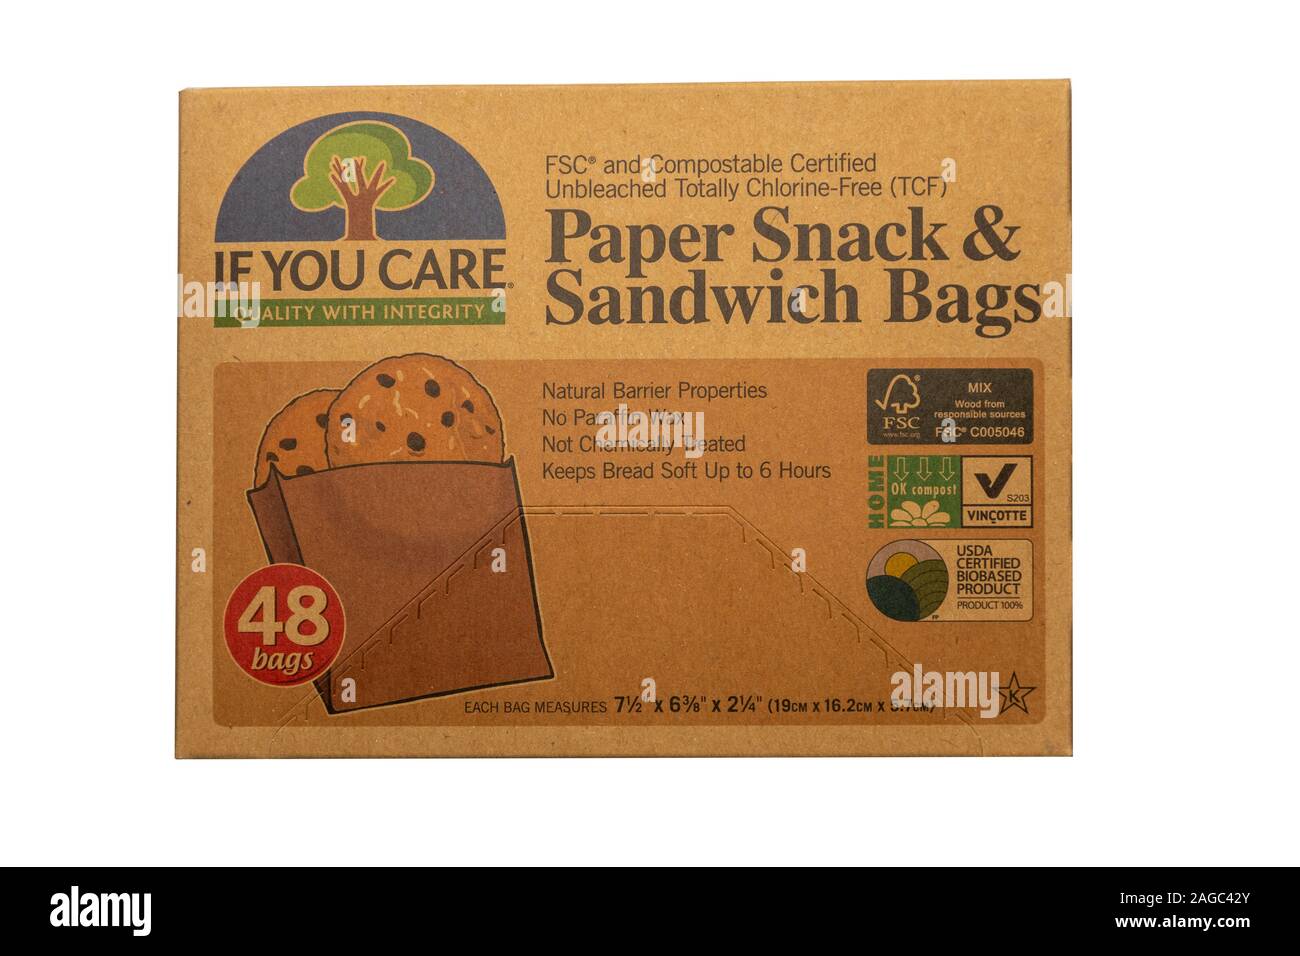 Paper snack and sandwich bags, an eco-friendly, environmentally friendly, compostable, plastic-free alternative to plastic bags, by If You Care Stock Photo